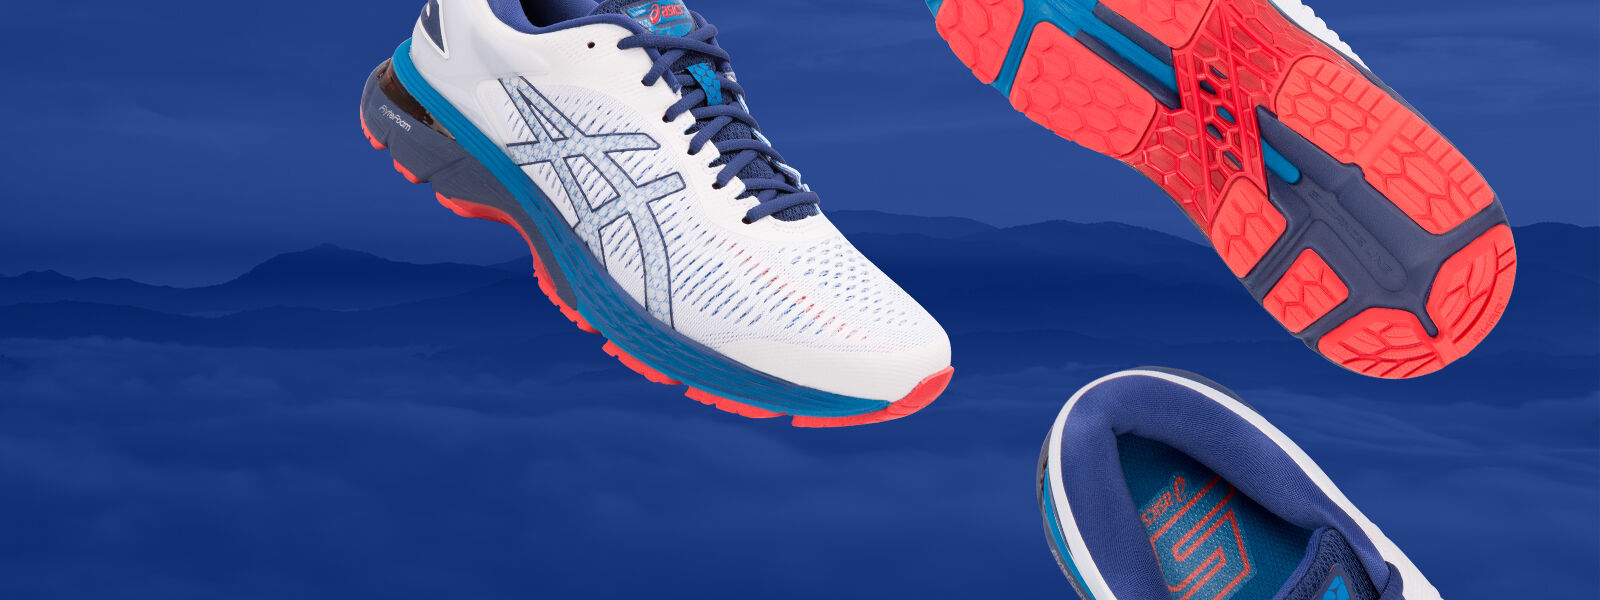 asics outlet coupons